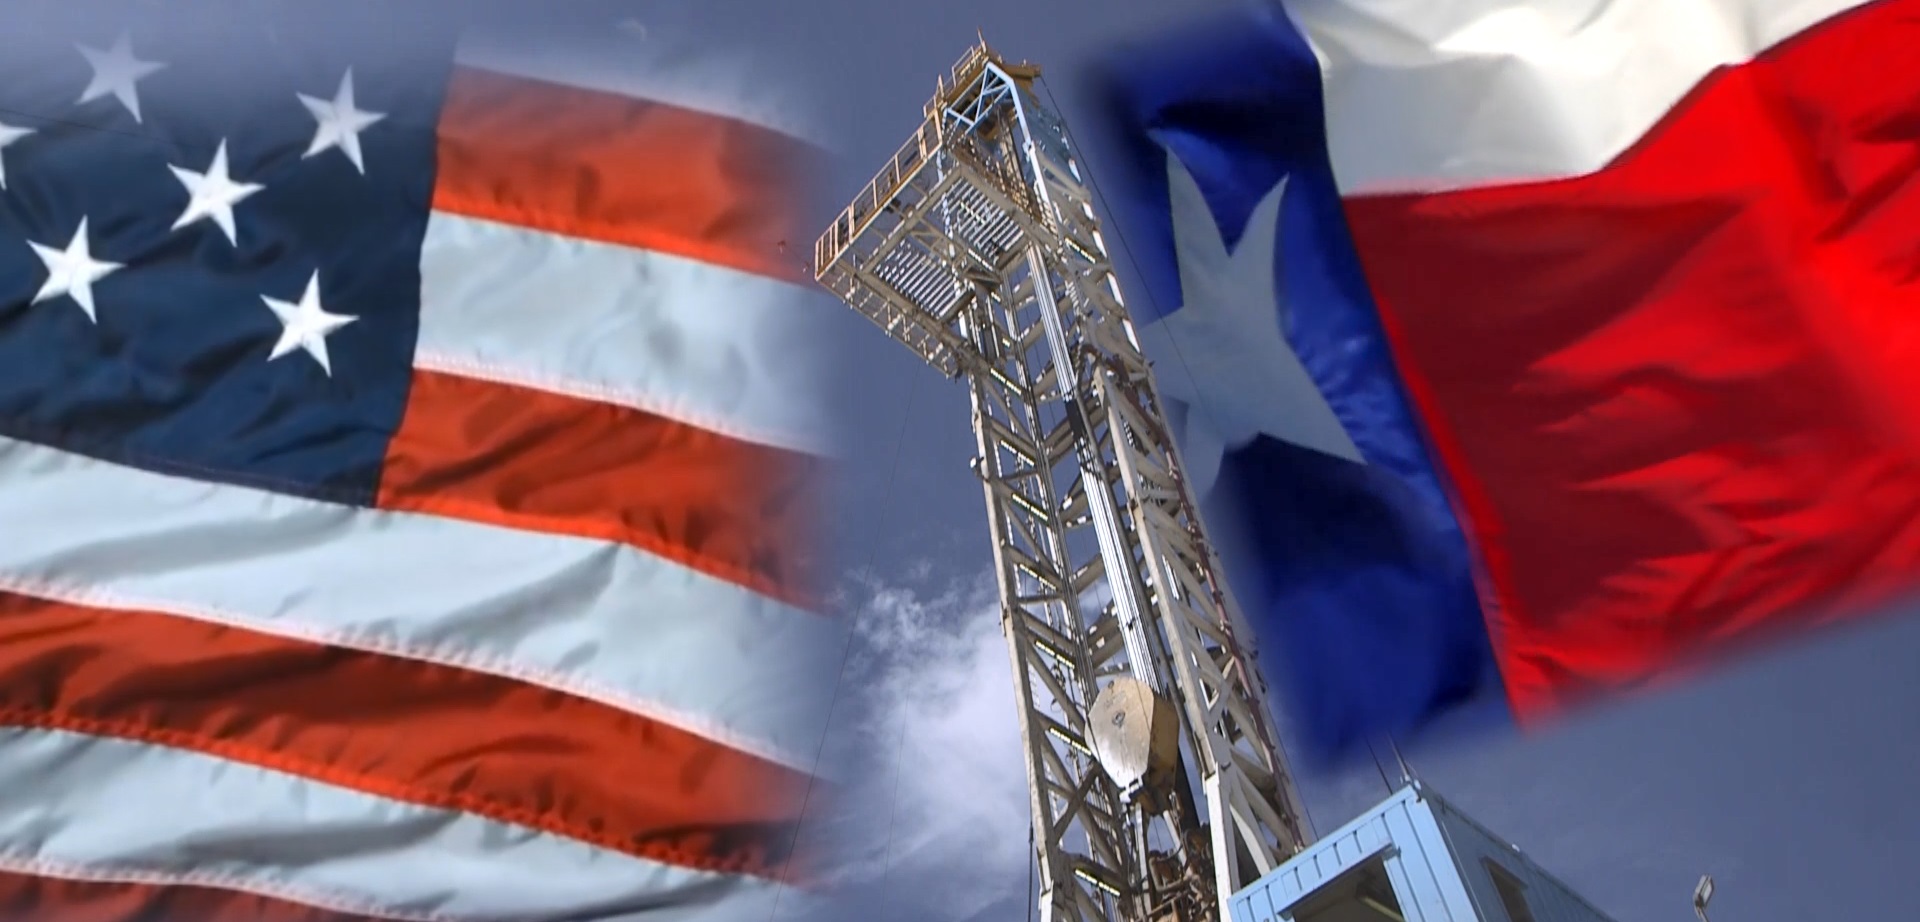 Exploring the Heart of American Energy: Oil Field and Rig Equipment Across the USA